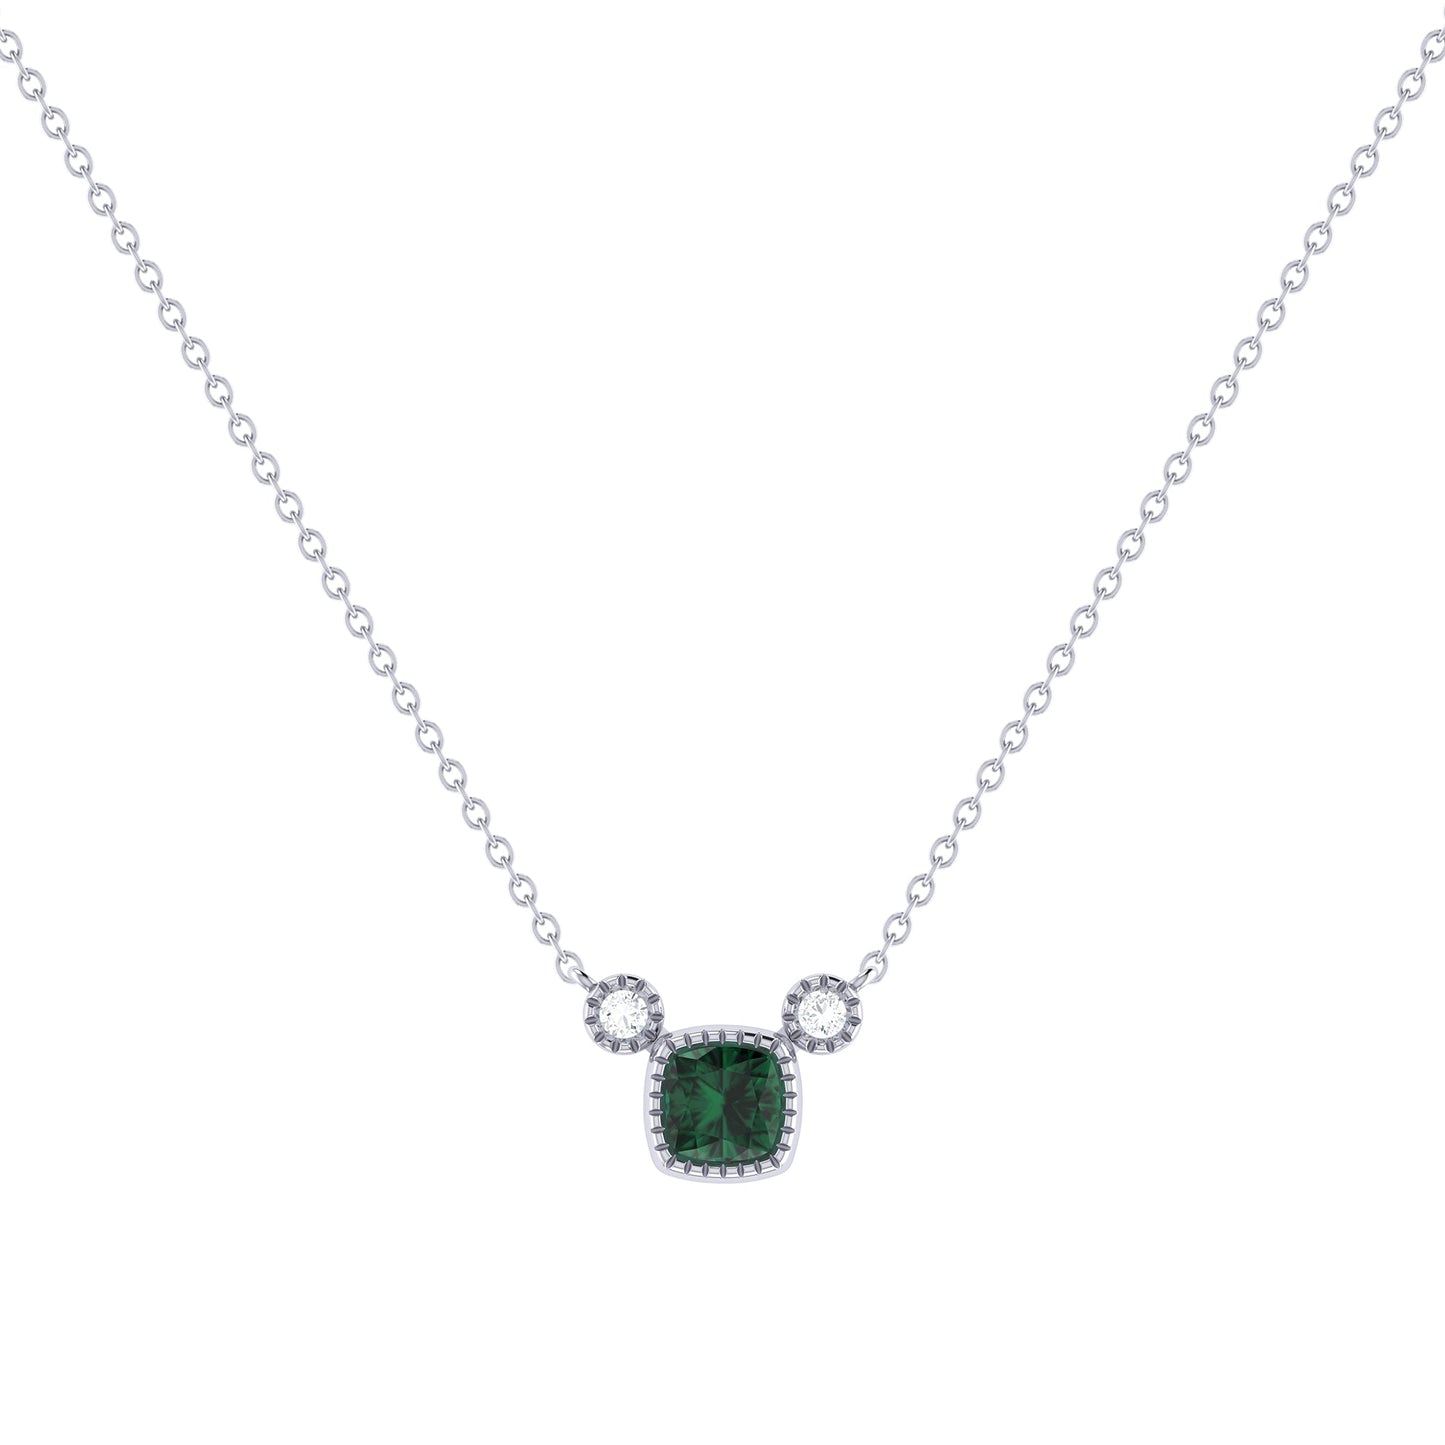 Cushion Cut Emerald & Diamond Birthstone Necklace In 14K White Gold by LuvMyJewelry